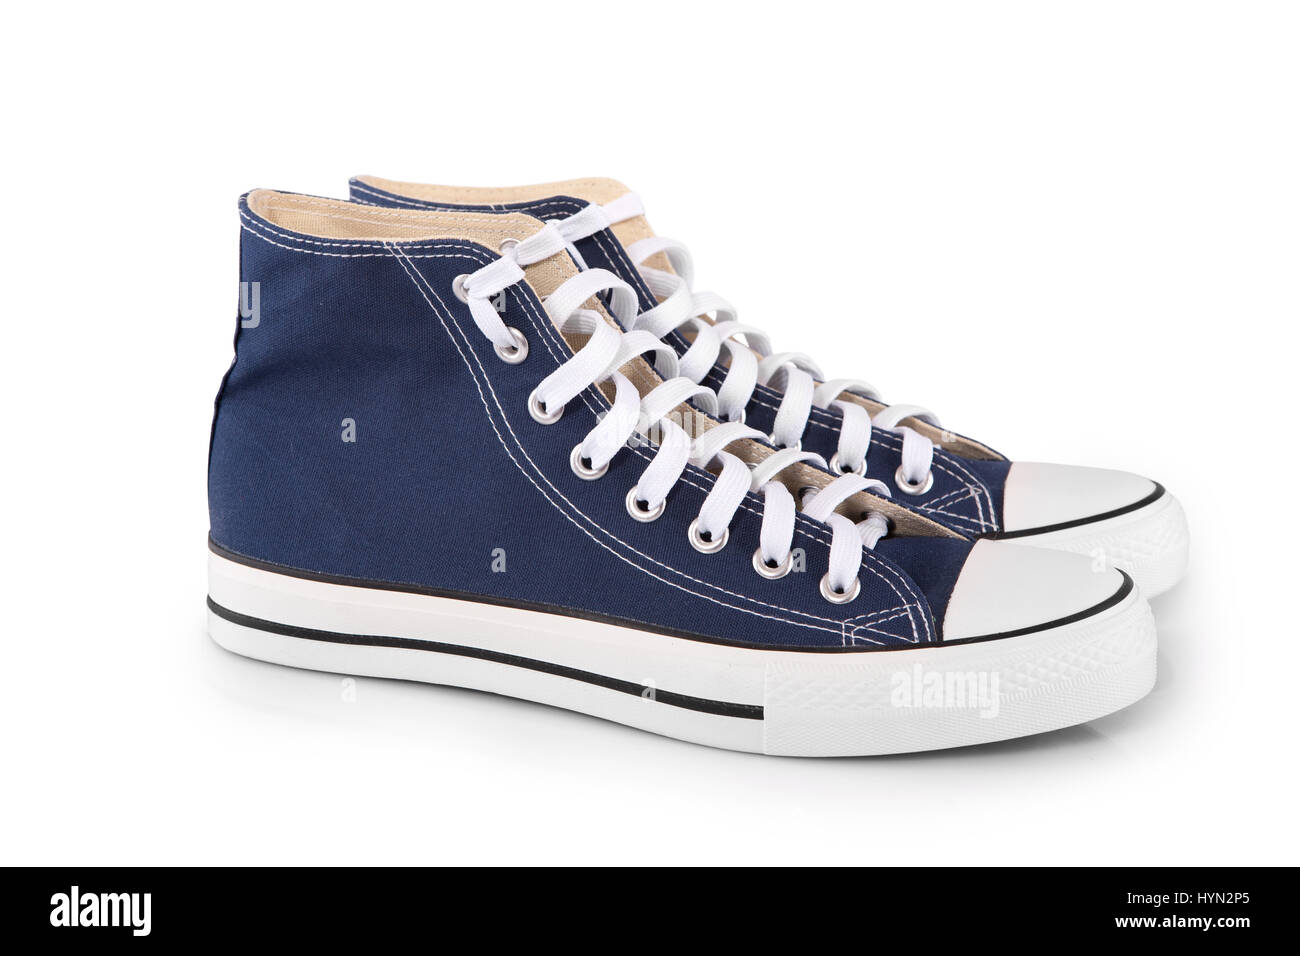 Pair of new blue sneakers on white background Stock Photo